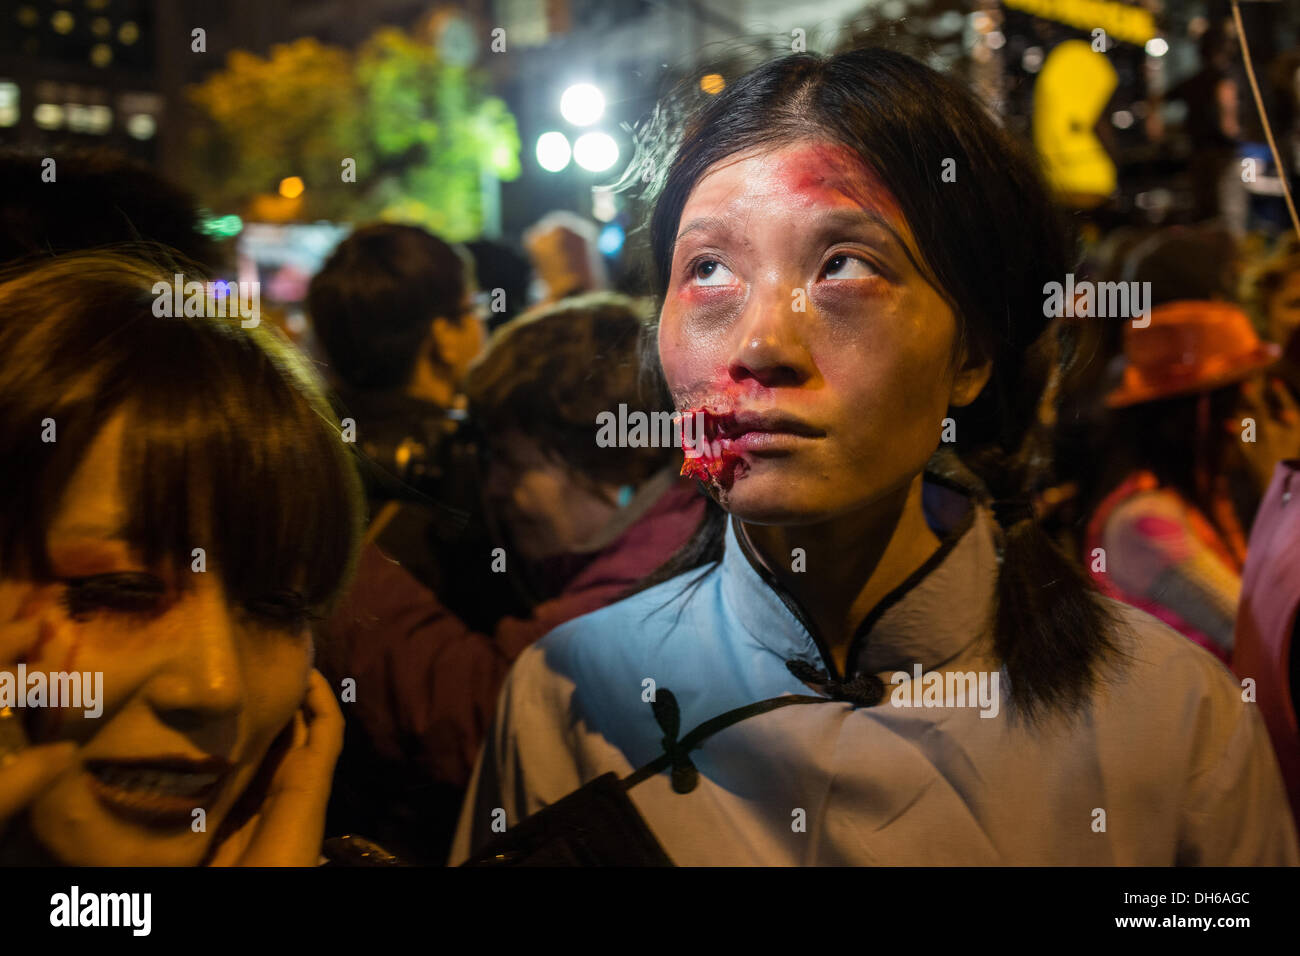 New York, NY, 31 October 2013. A woman in gory makeup as if her face had been torn open in the annual Greenwich Village Halloween Parade. Credit:  Ed Lefkowicz/Alamy Live News Stock Photo